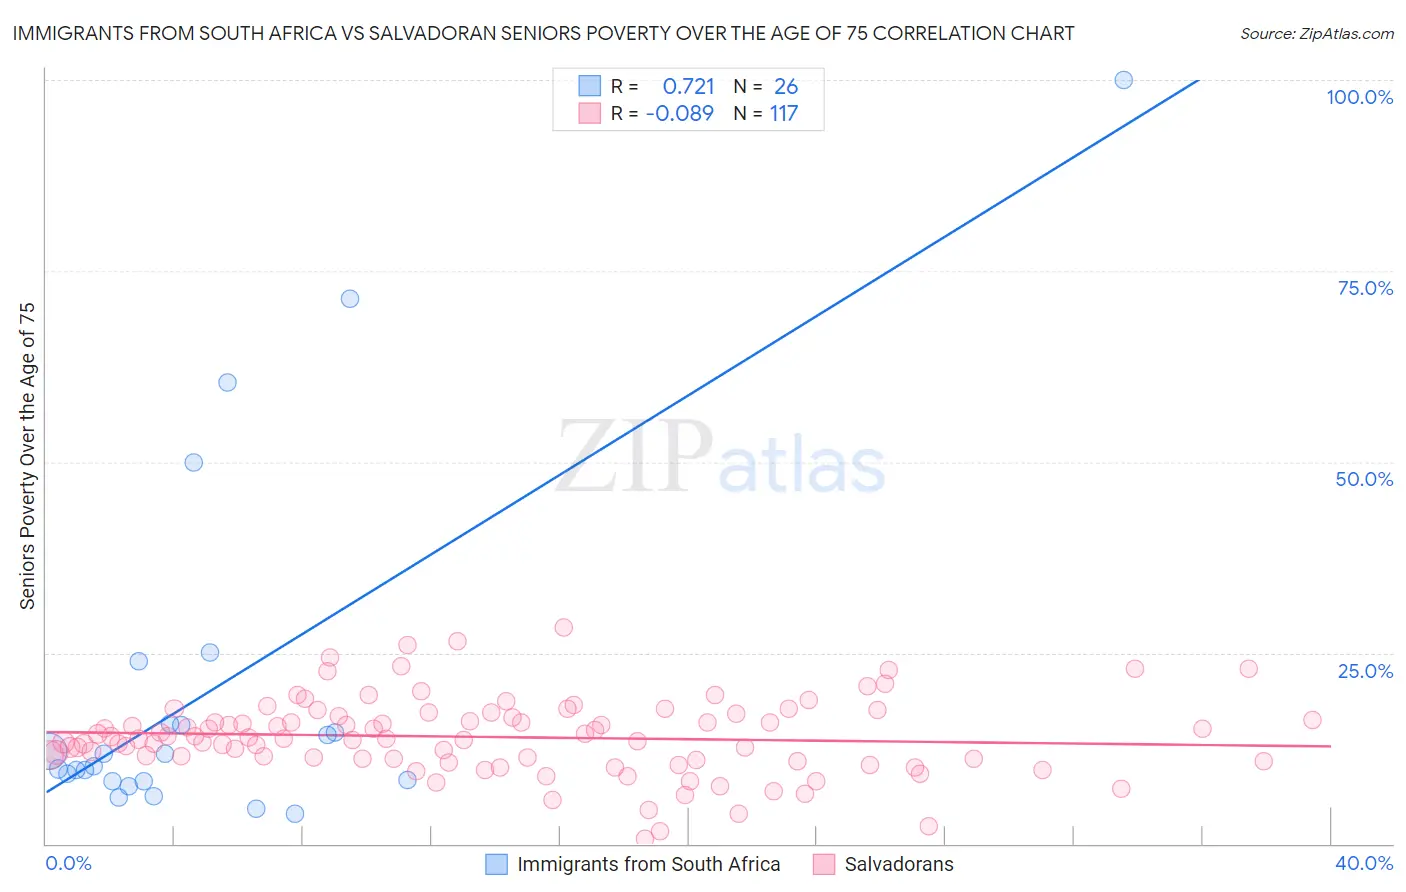 Immigrants from South Africa vs Salvadoran Seniors Poverty Over the Age of 75